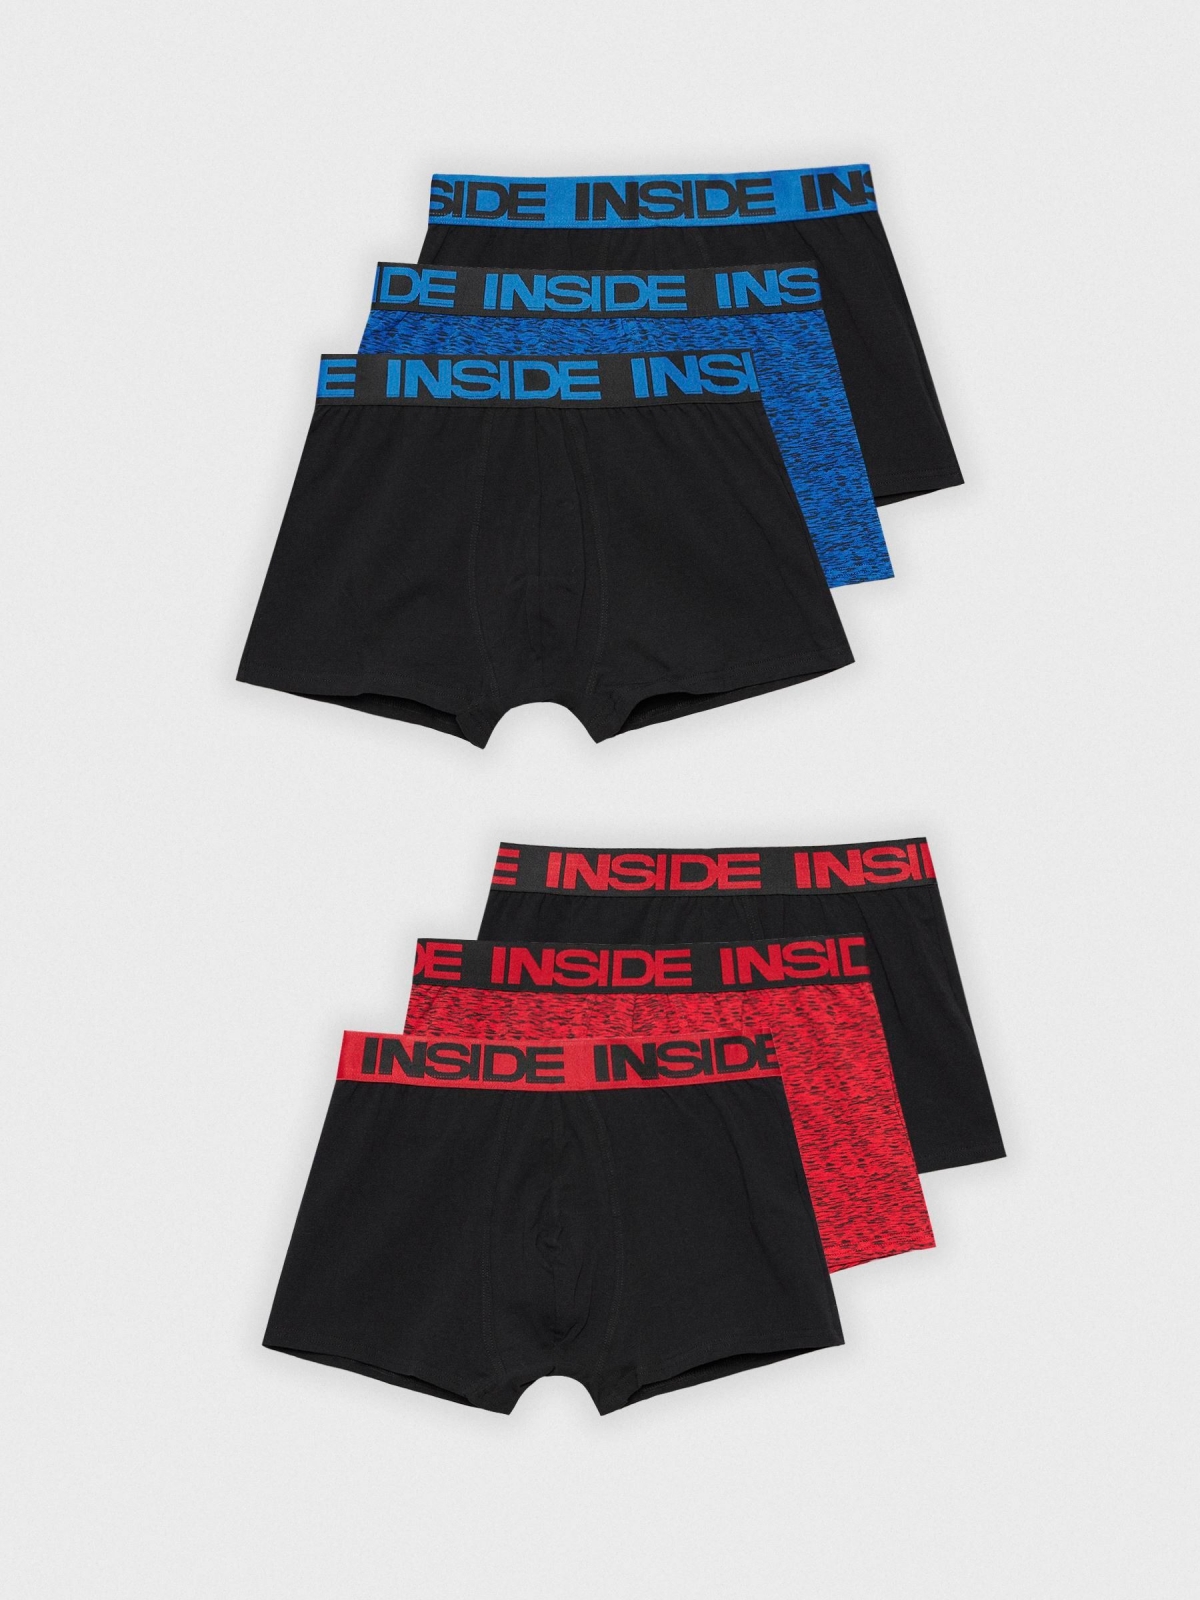 Pack 6 boxers INSIDE with contrasts